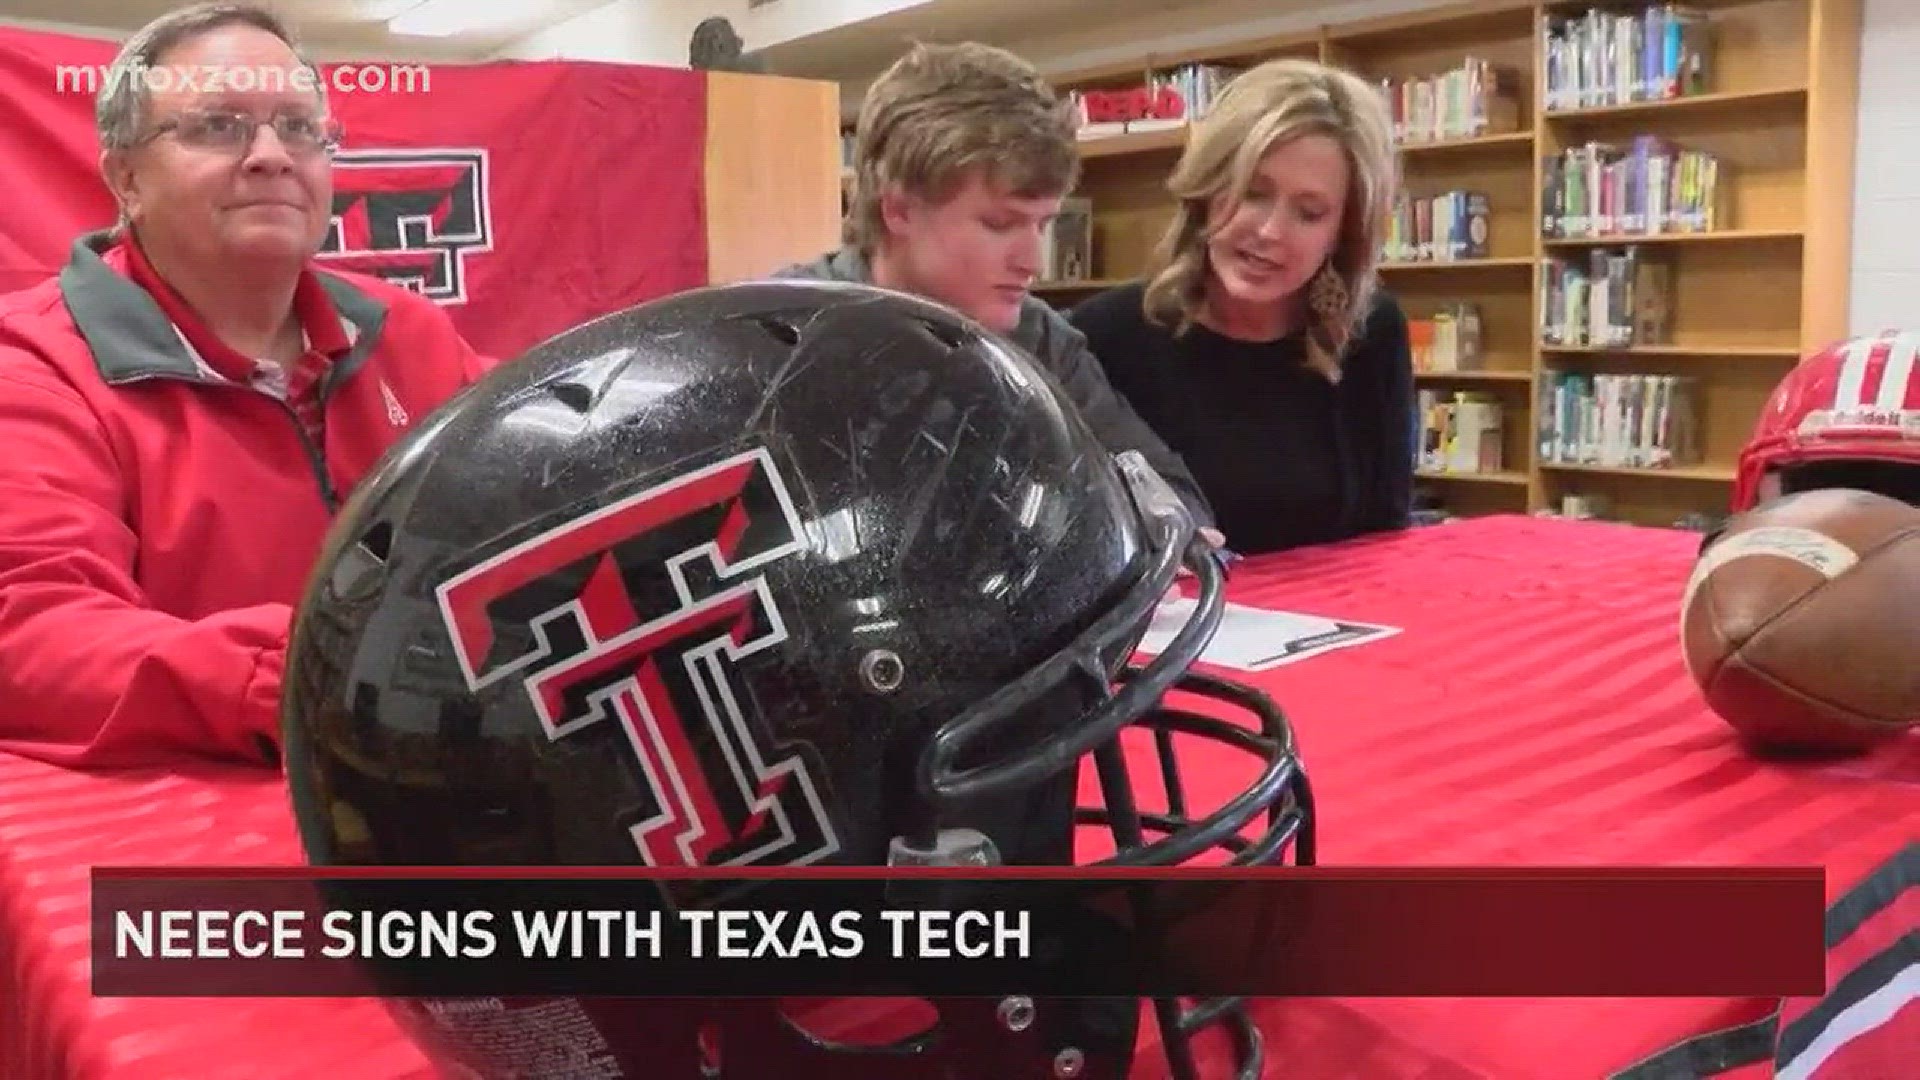 Albany Lion receiver Dax Neece officially signed with Texas Tech yesterday. He will be a preferred walk on as a receiver.